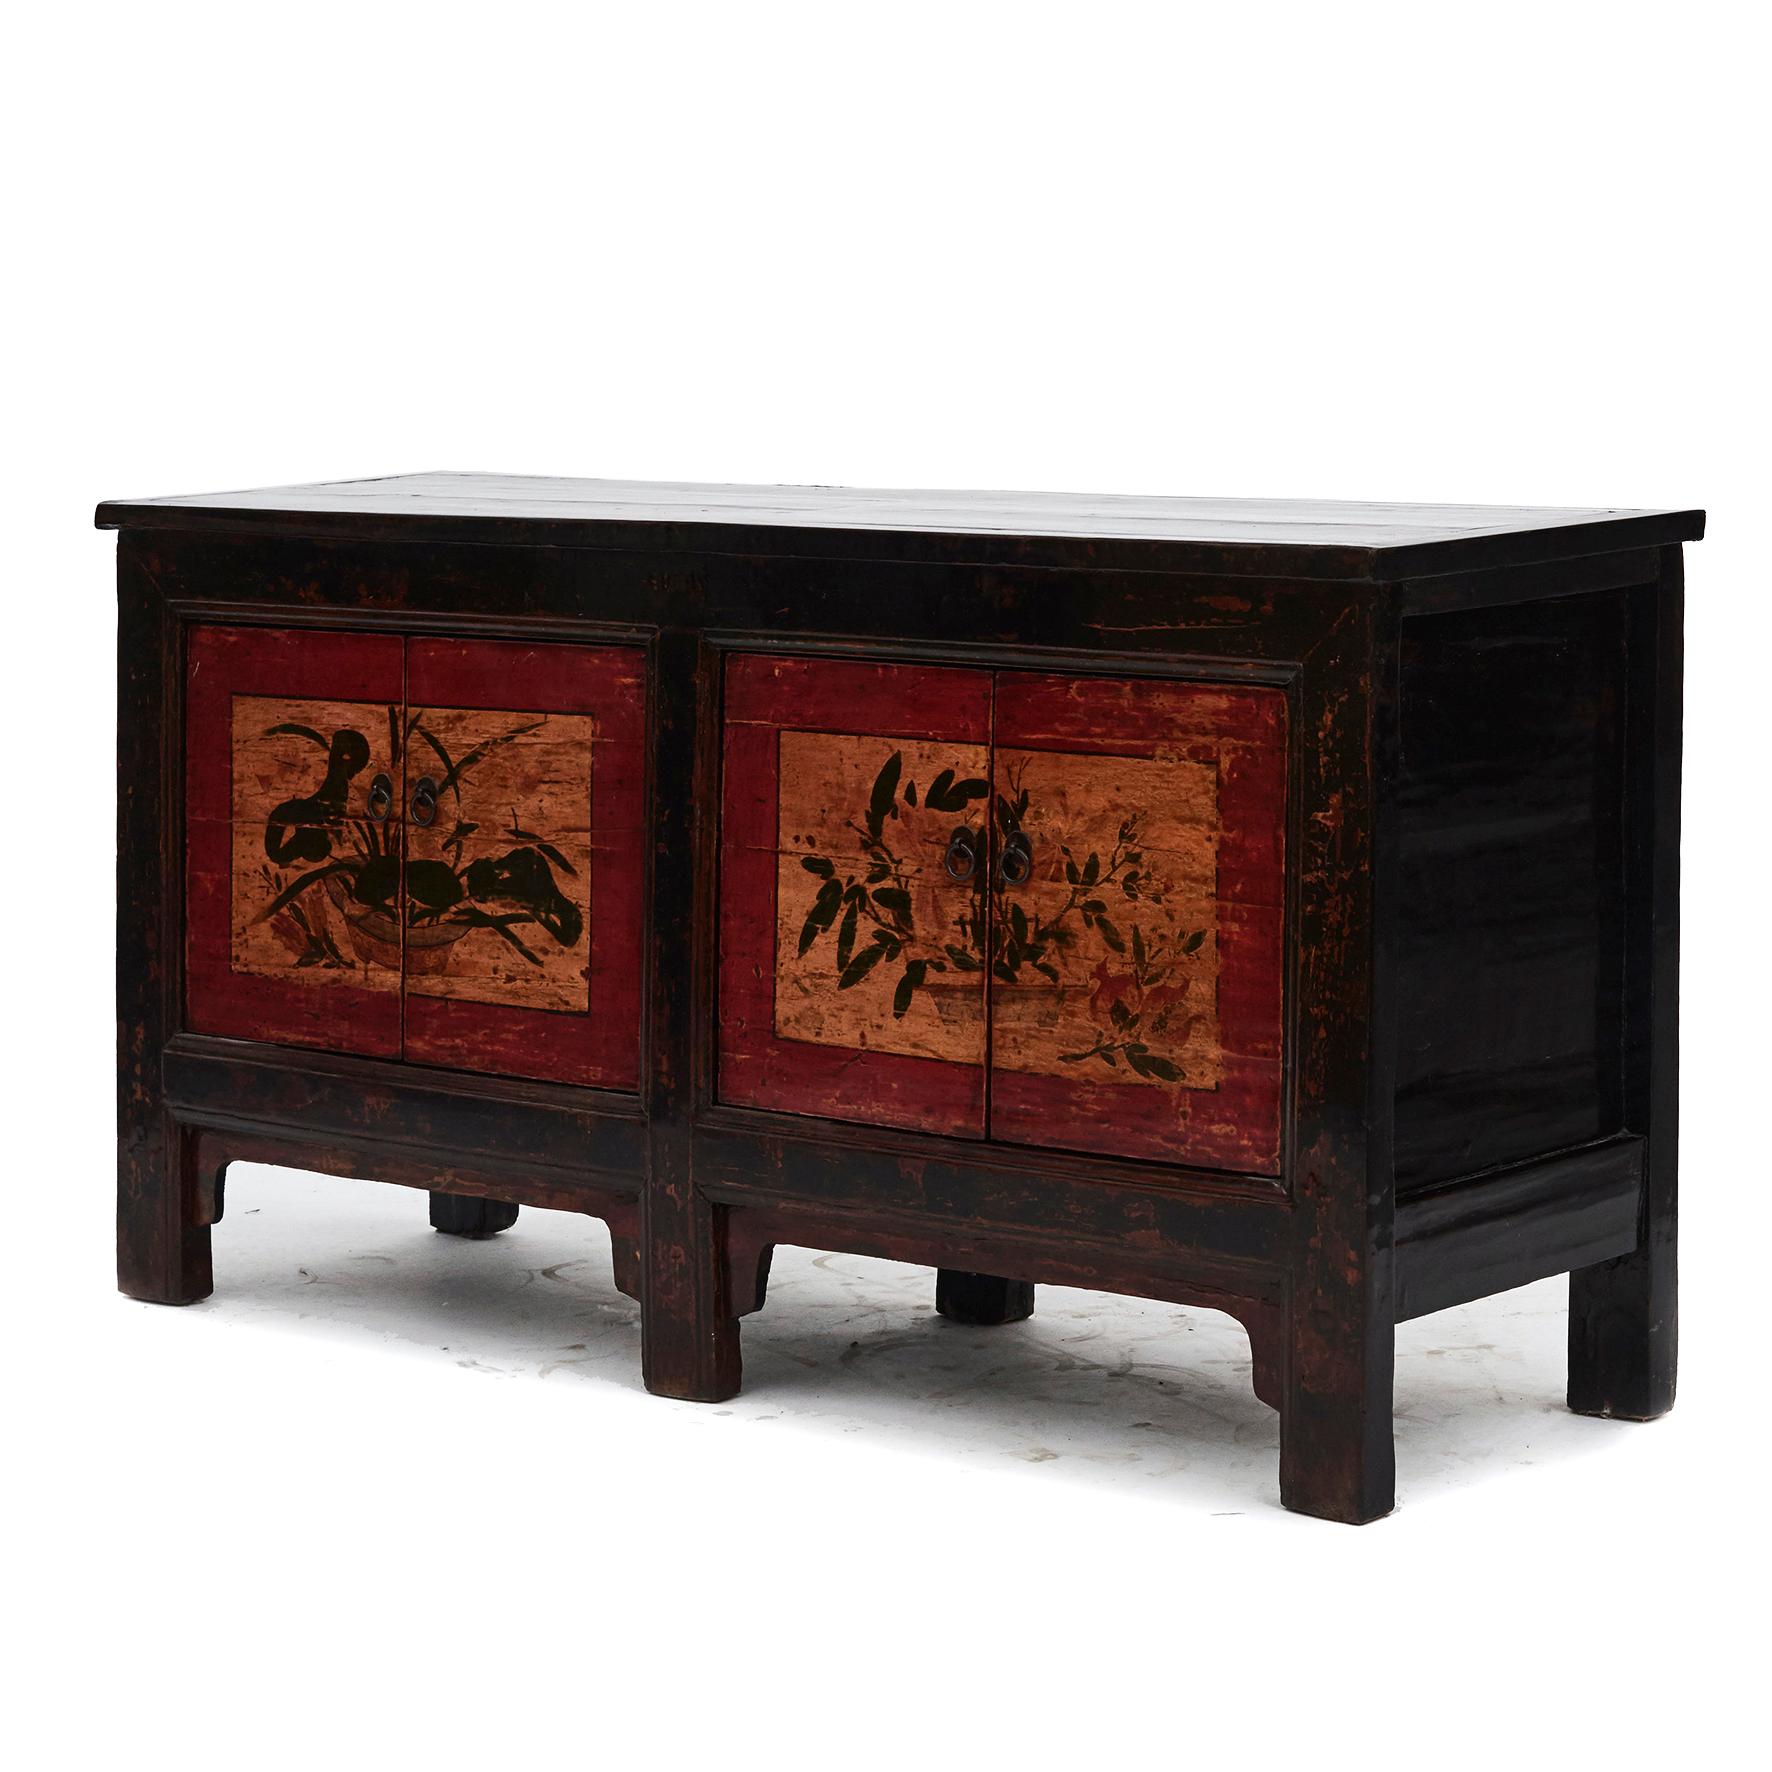 Sideboard in elm wood from Shandong province in China.
Black lacquer, with two pair of doors in polychrome lacquer with decorations.

Natural age-related beautiful patina, highlighted by clear lacquer surface finish.